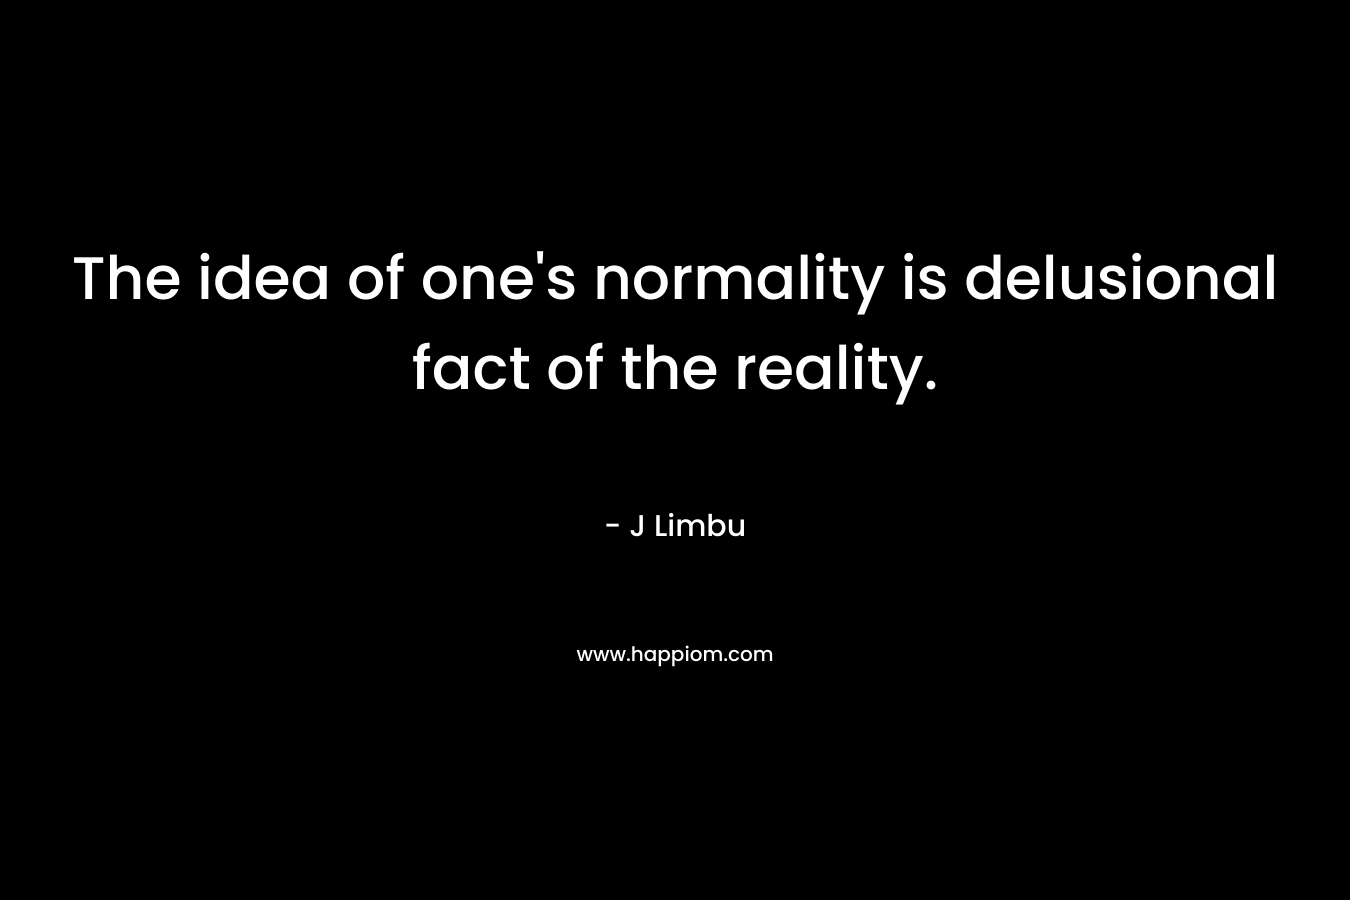 The idea of one’s normality is delusional fact of the reality. – J Limbu